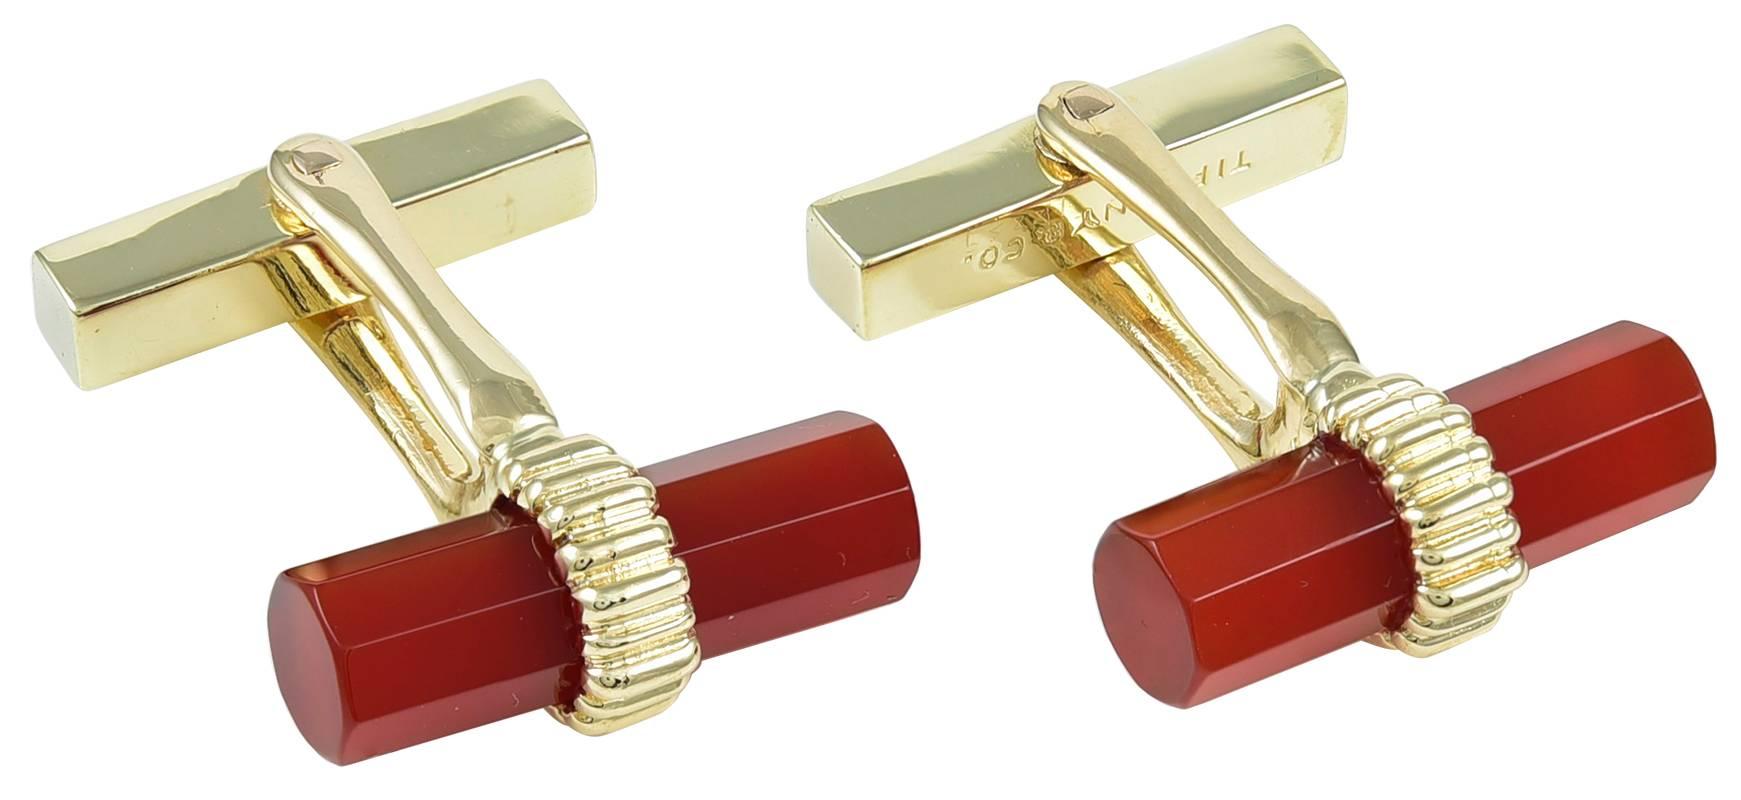 Classic bar cufflinks.  Made and signed by TIFFANY & CO.  Faceted carnelian bars, intersected with ribbed gold bands.  14K yellow gold.  Very handsome.

Alice Kwartler has sold the finest antique gold and diamond jewelry and silver for over